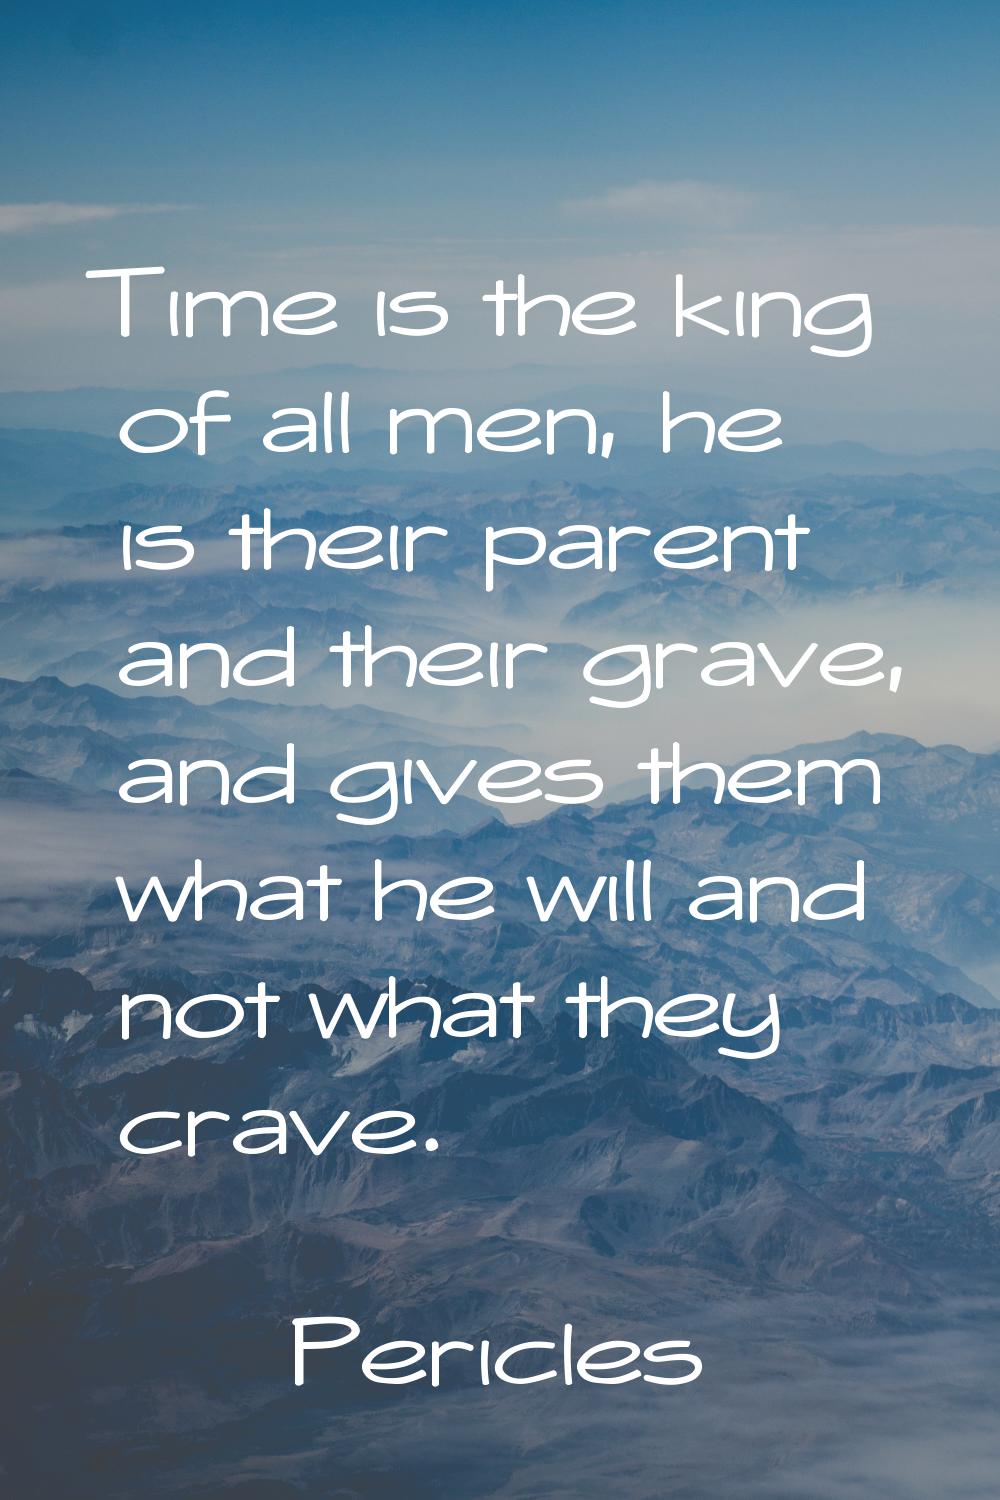 Time is the king of all men, he is their parent and their grave, and gives them what he will and no